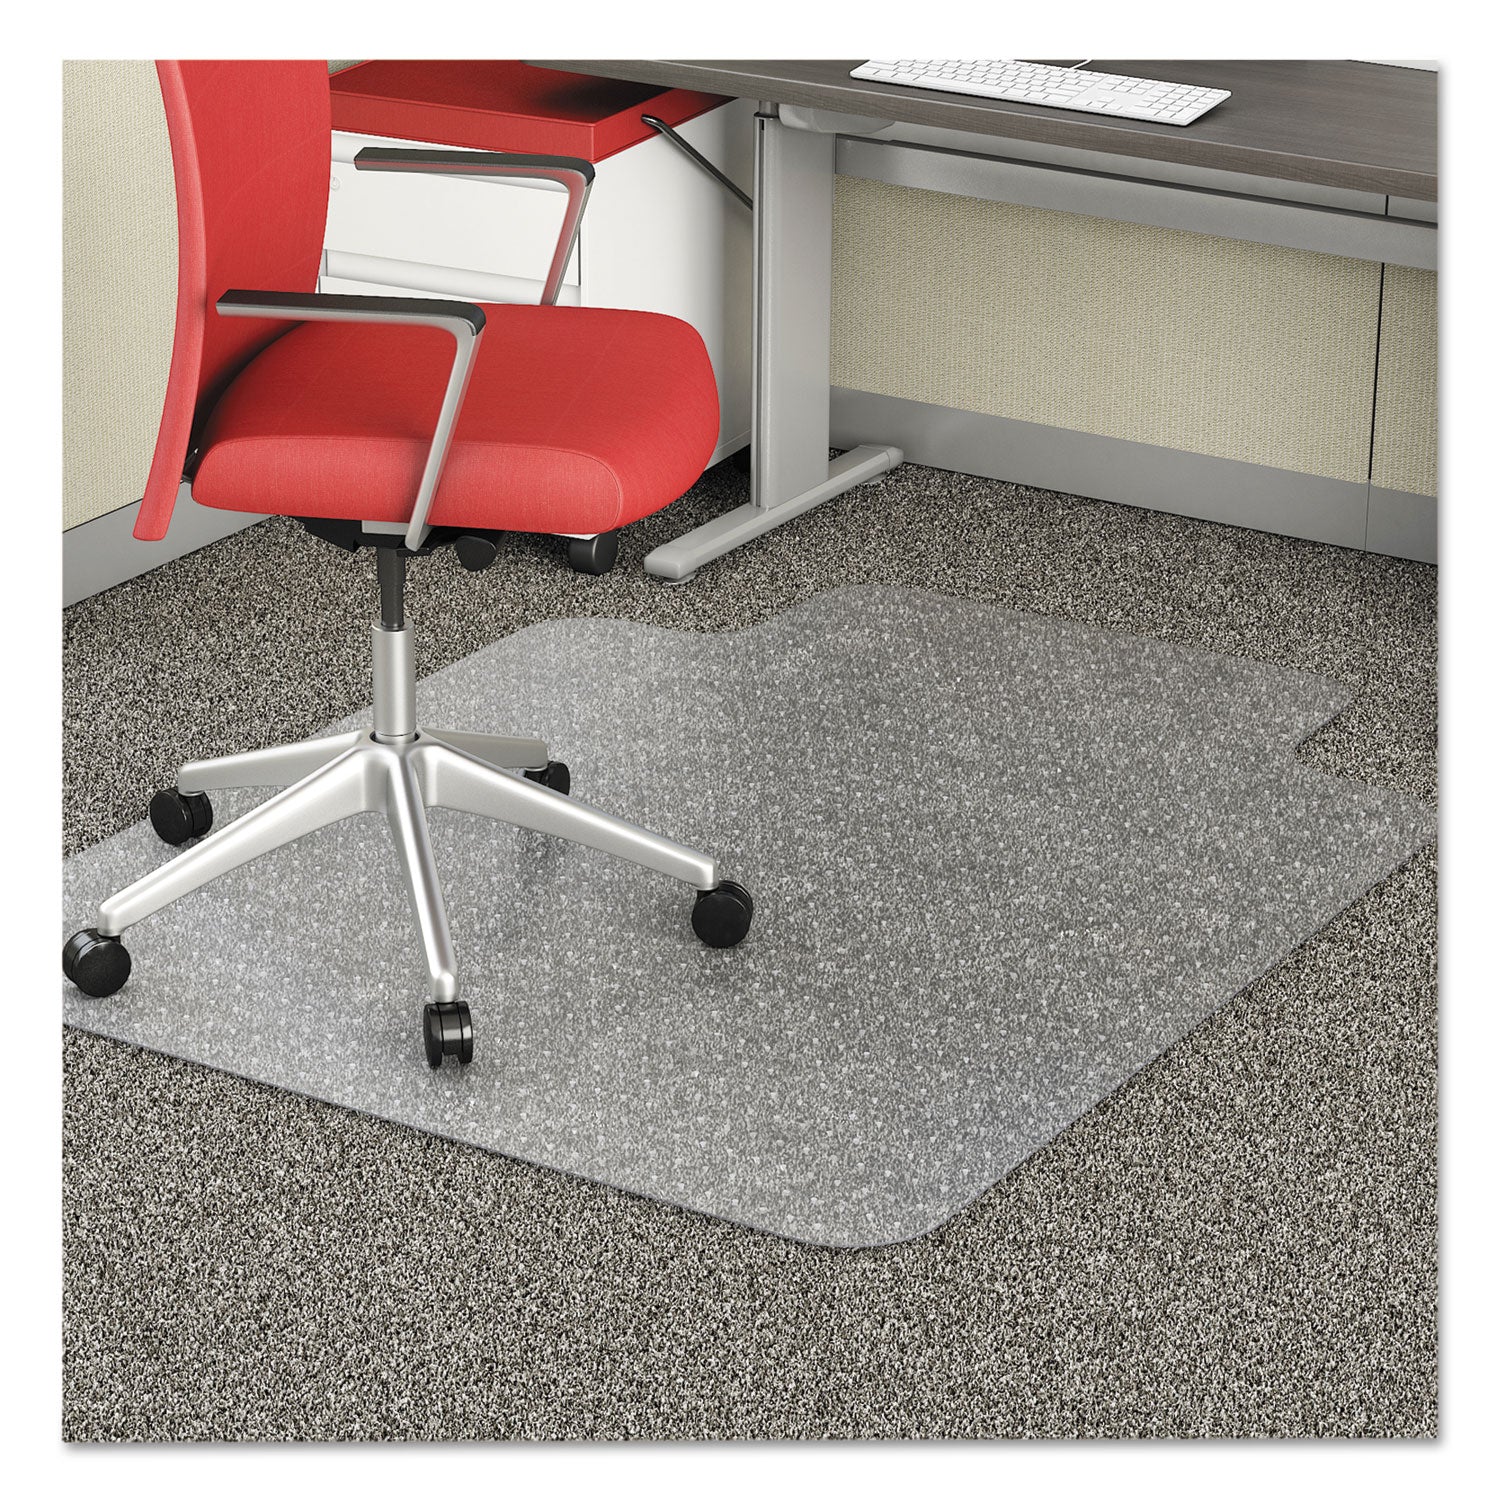 EconoMat Occasional Use Chair Mat, Low Pile Carpet, Flat, 36 x 48, Lipped, Clear - 